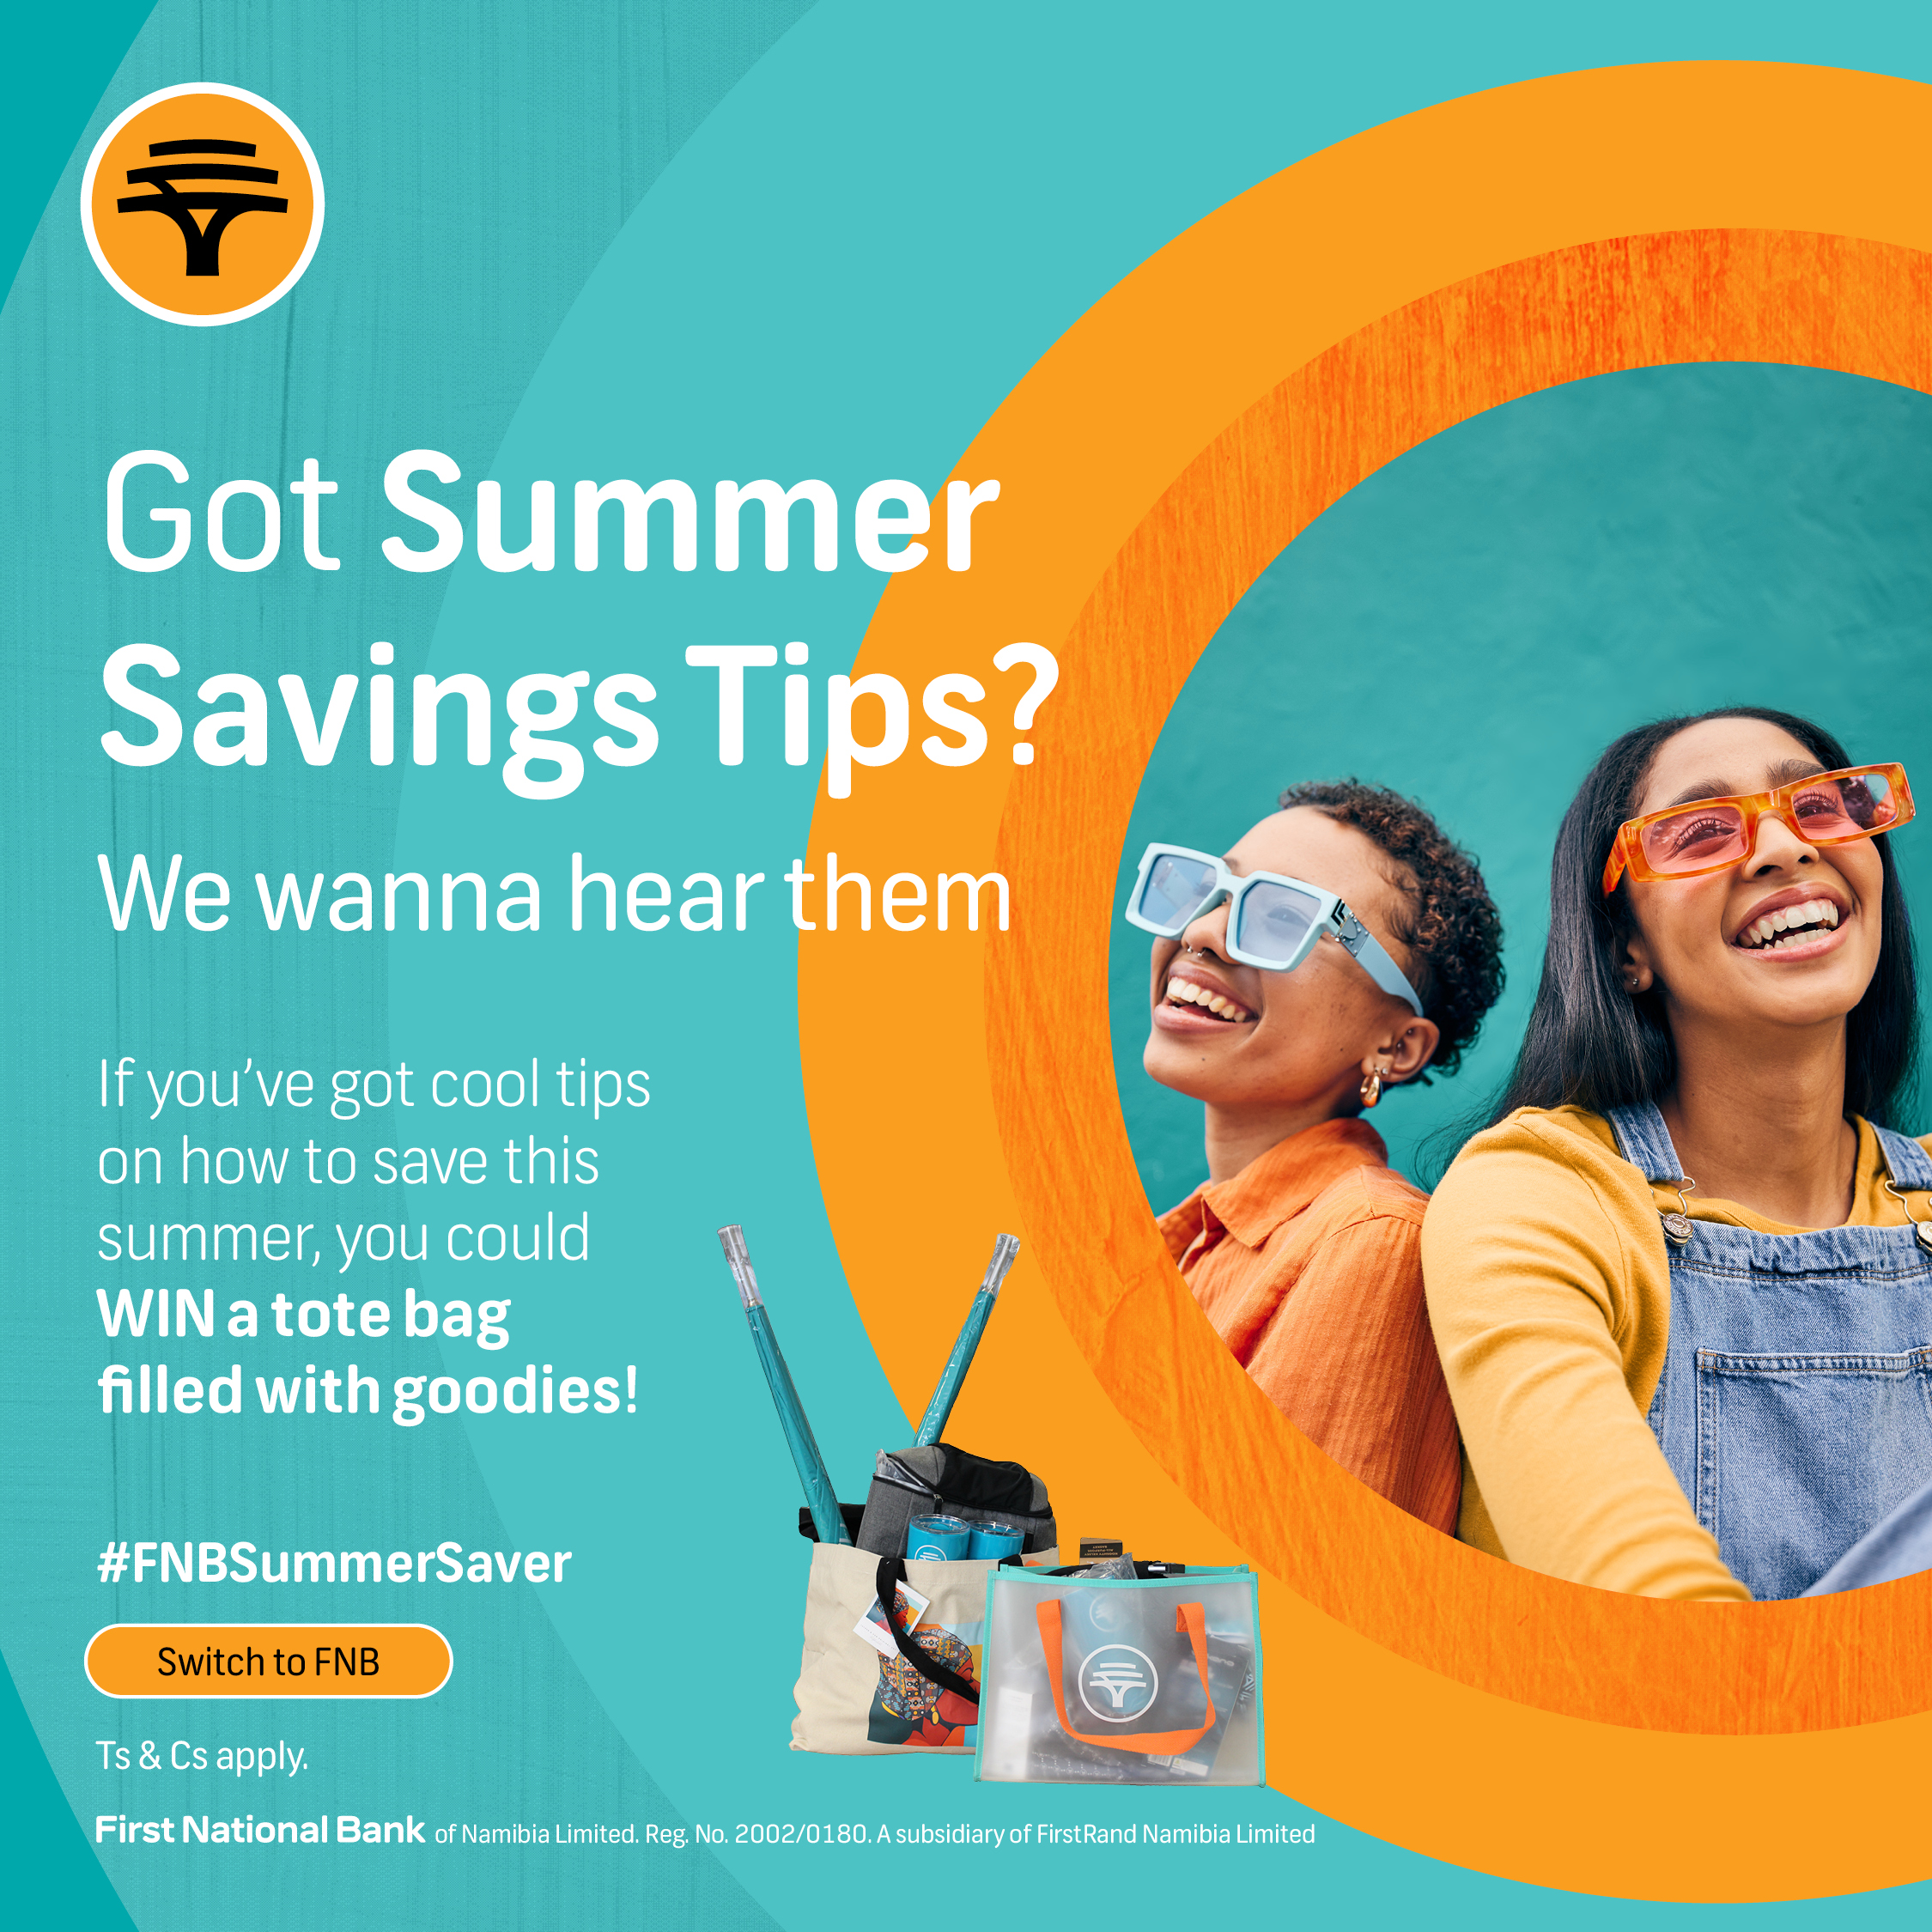 FNB Namibia on X: Gifts, parties, travels… it's easy to spend like there's  no tomorrow during summertime. That's why, if you have any summer savings  tips, we NEED to hear them! Comment